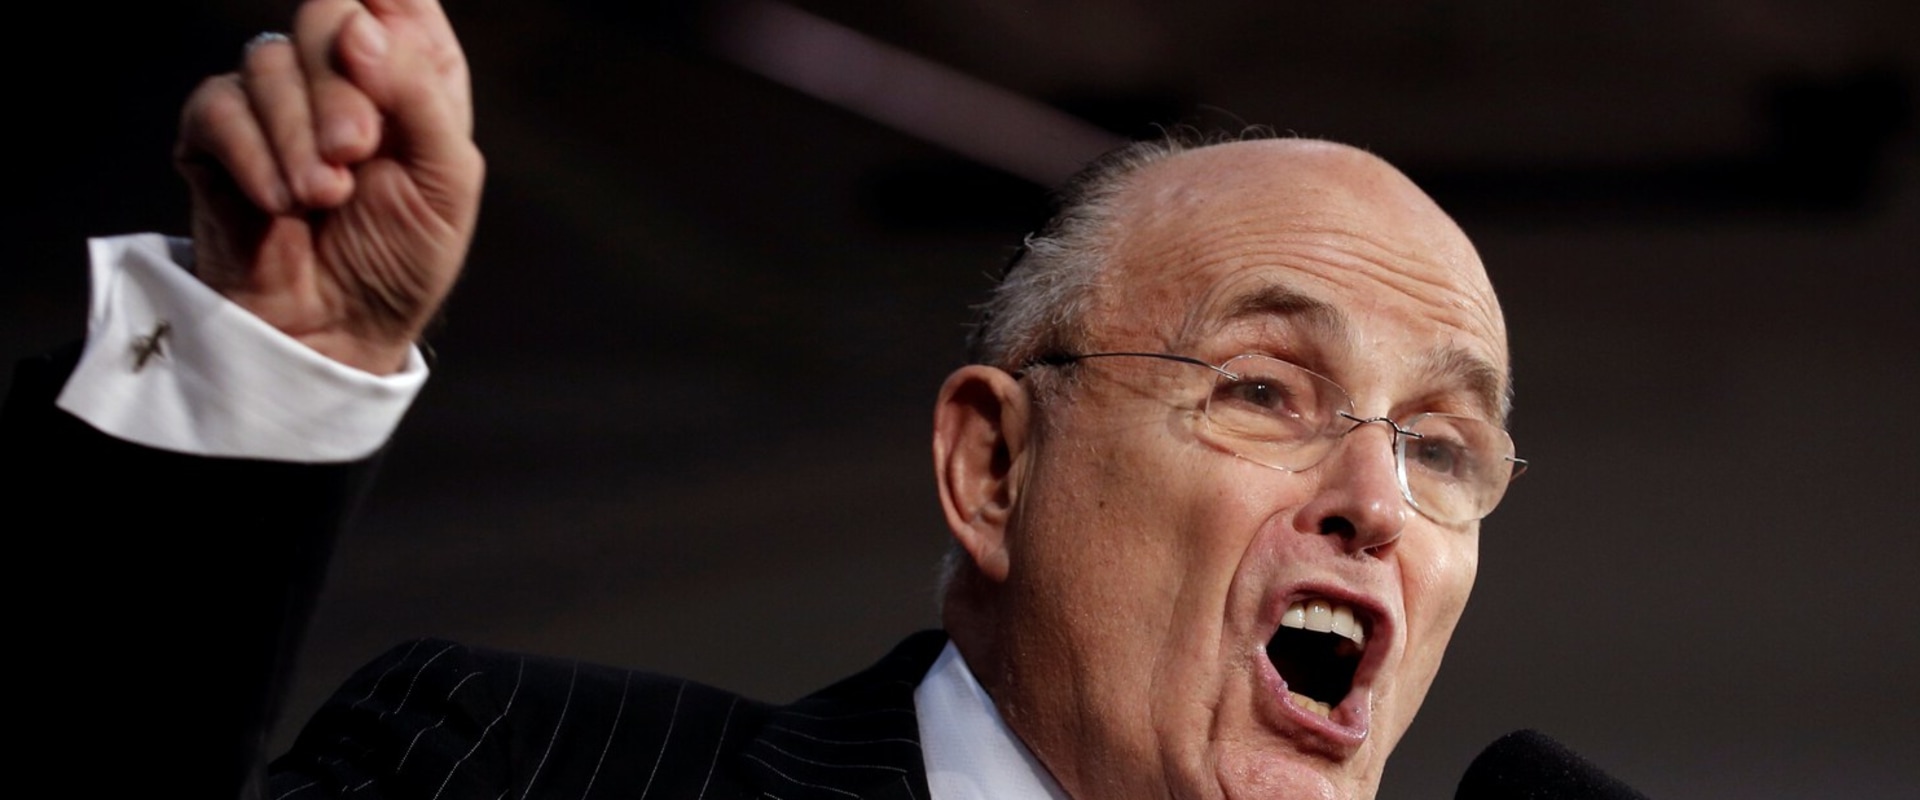 What political party was rudy giuliani affiliated with when he served as mayor of new york city?